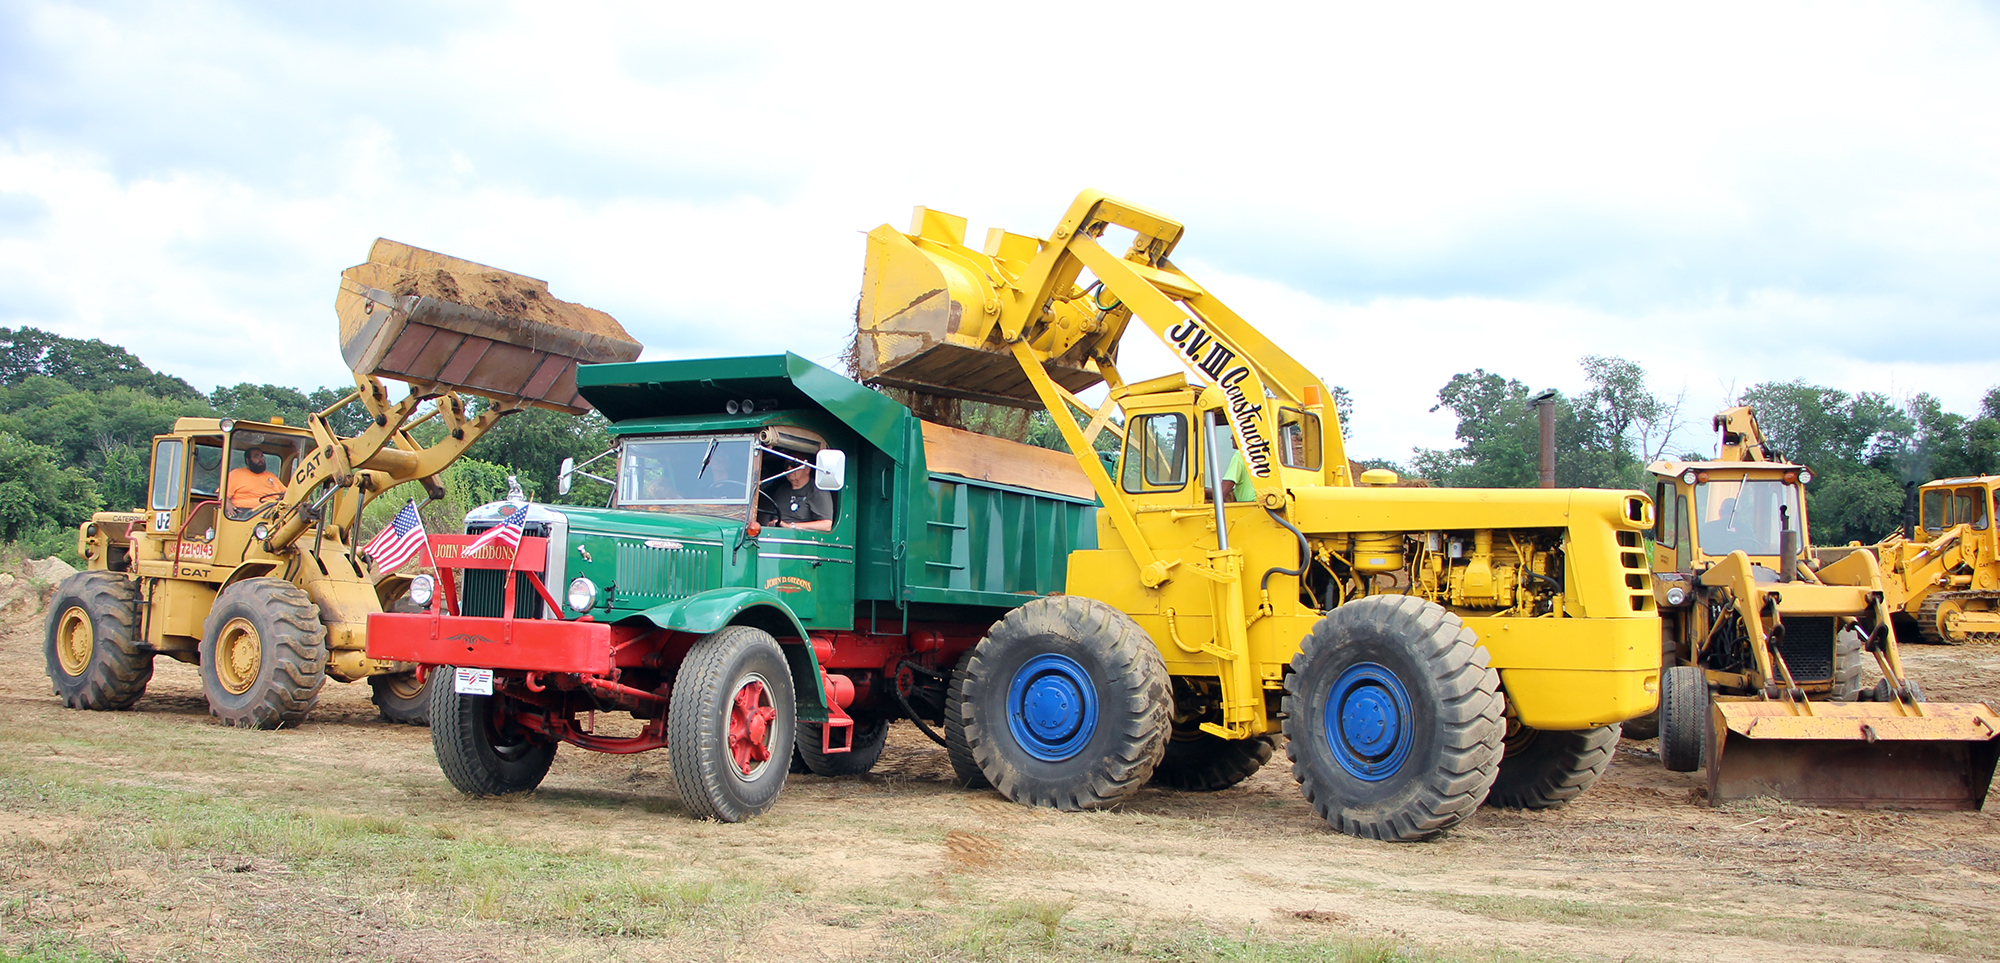 1938 FJ dump truck and two vintage loaders